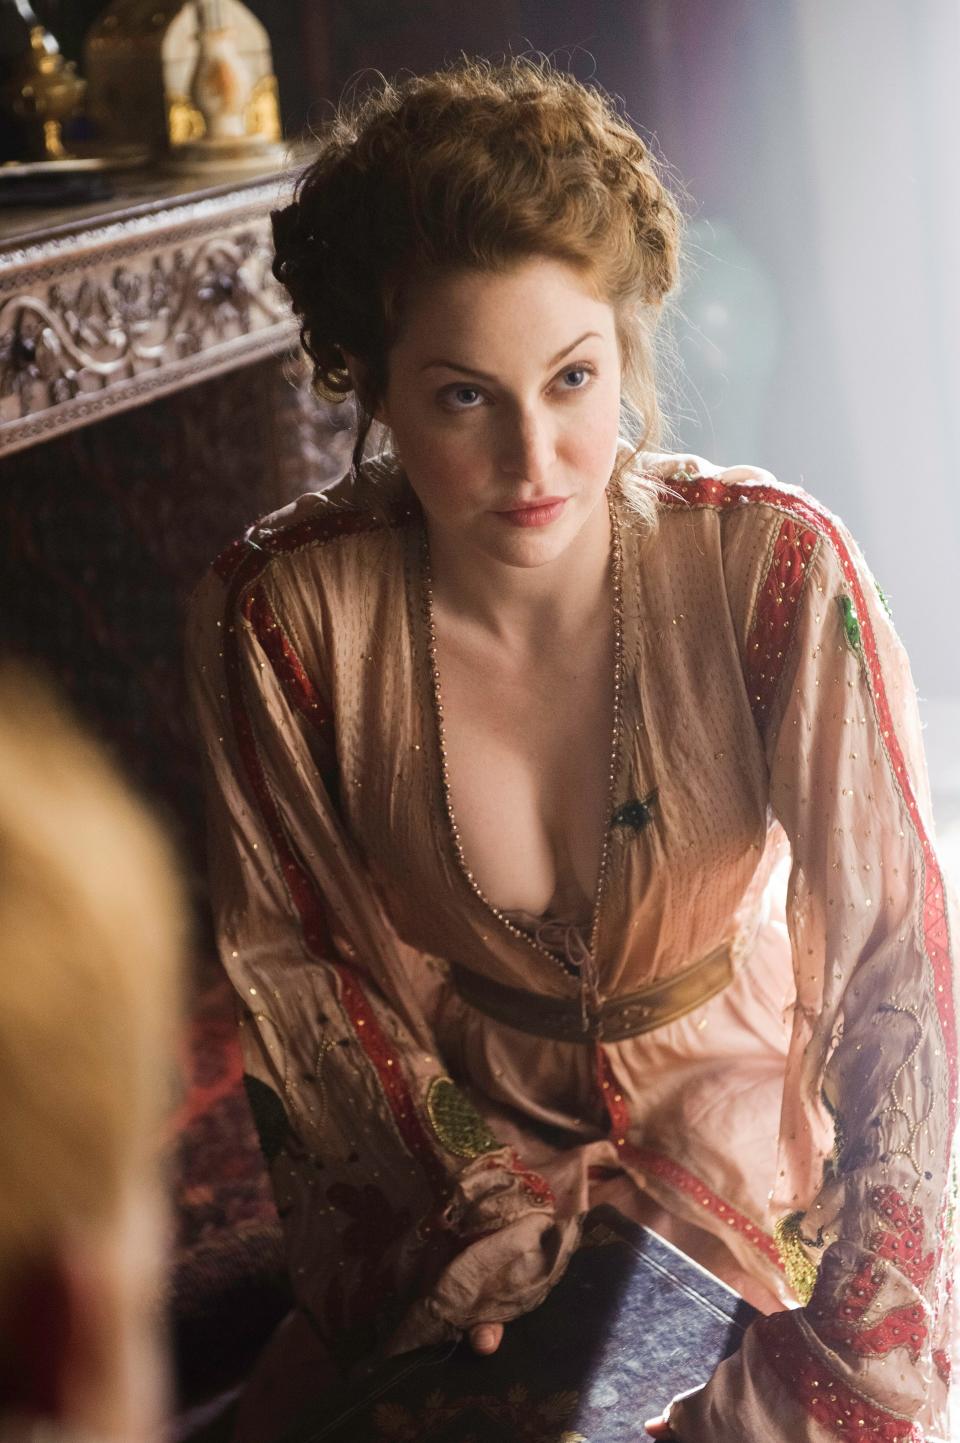 Esmé Bianco played Ros in "Game of Thrones," a prostitute frequently featured nude and/or in sex scenes in the series, which were not always vital to the plot.